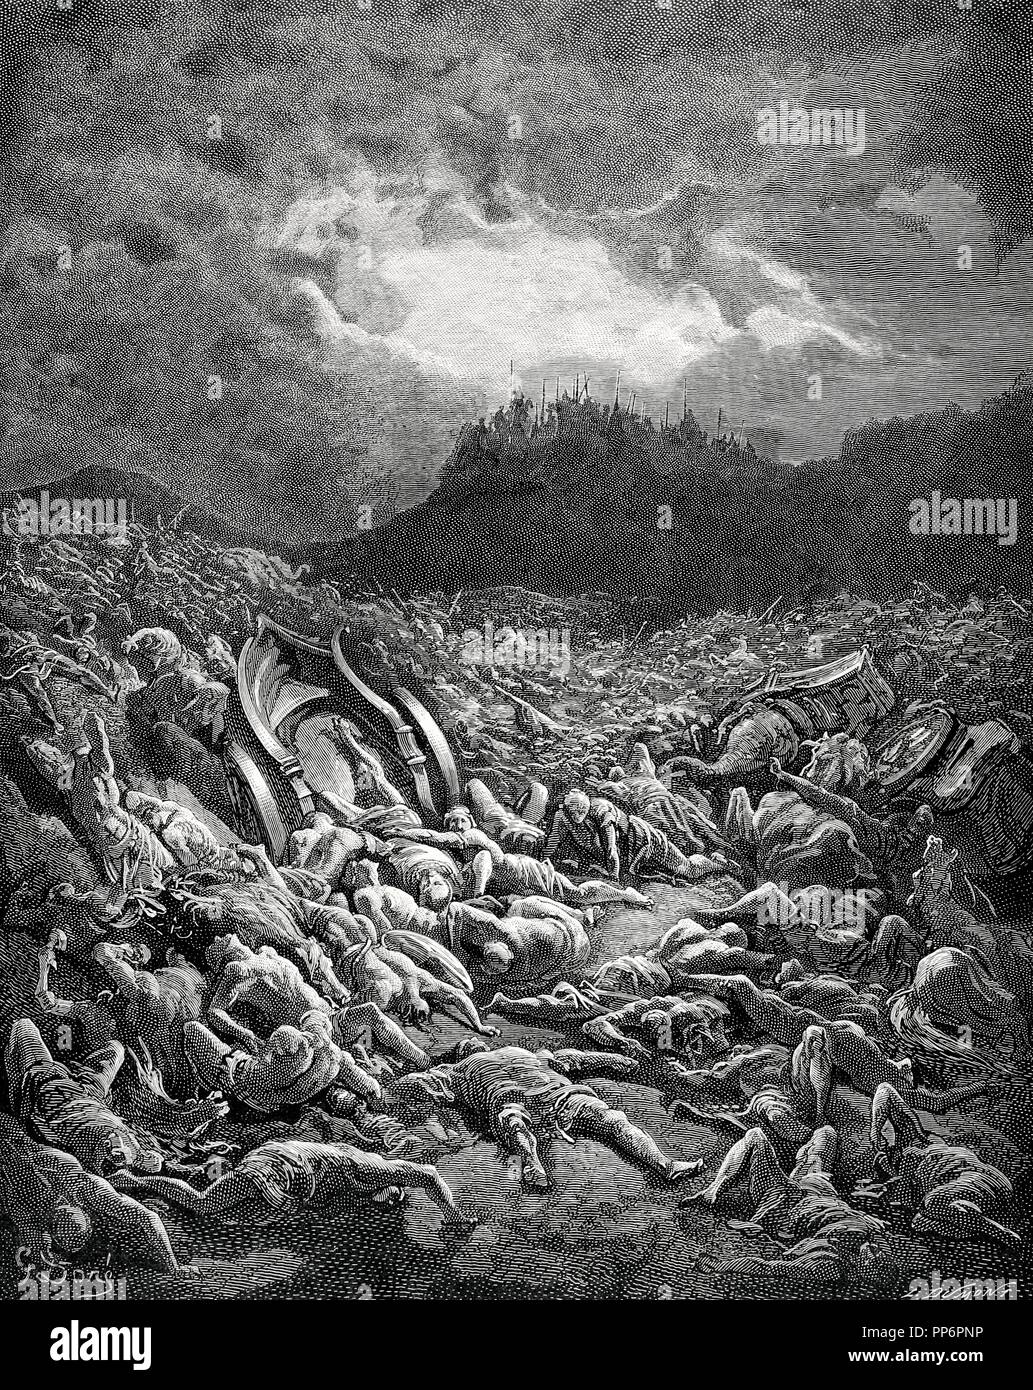 The Destruction of the Armies of the Ammonites and Moabites. Dore Bible illustrations. 19th century. Engraving. Stock Photo